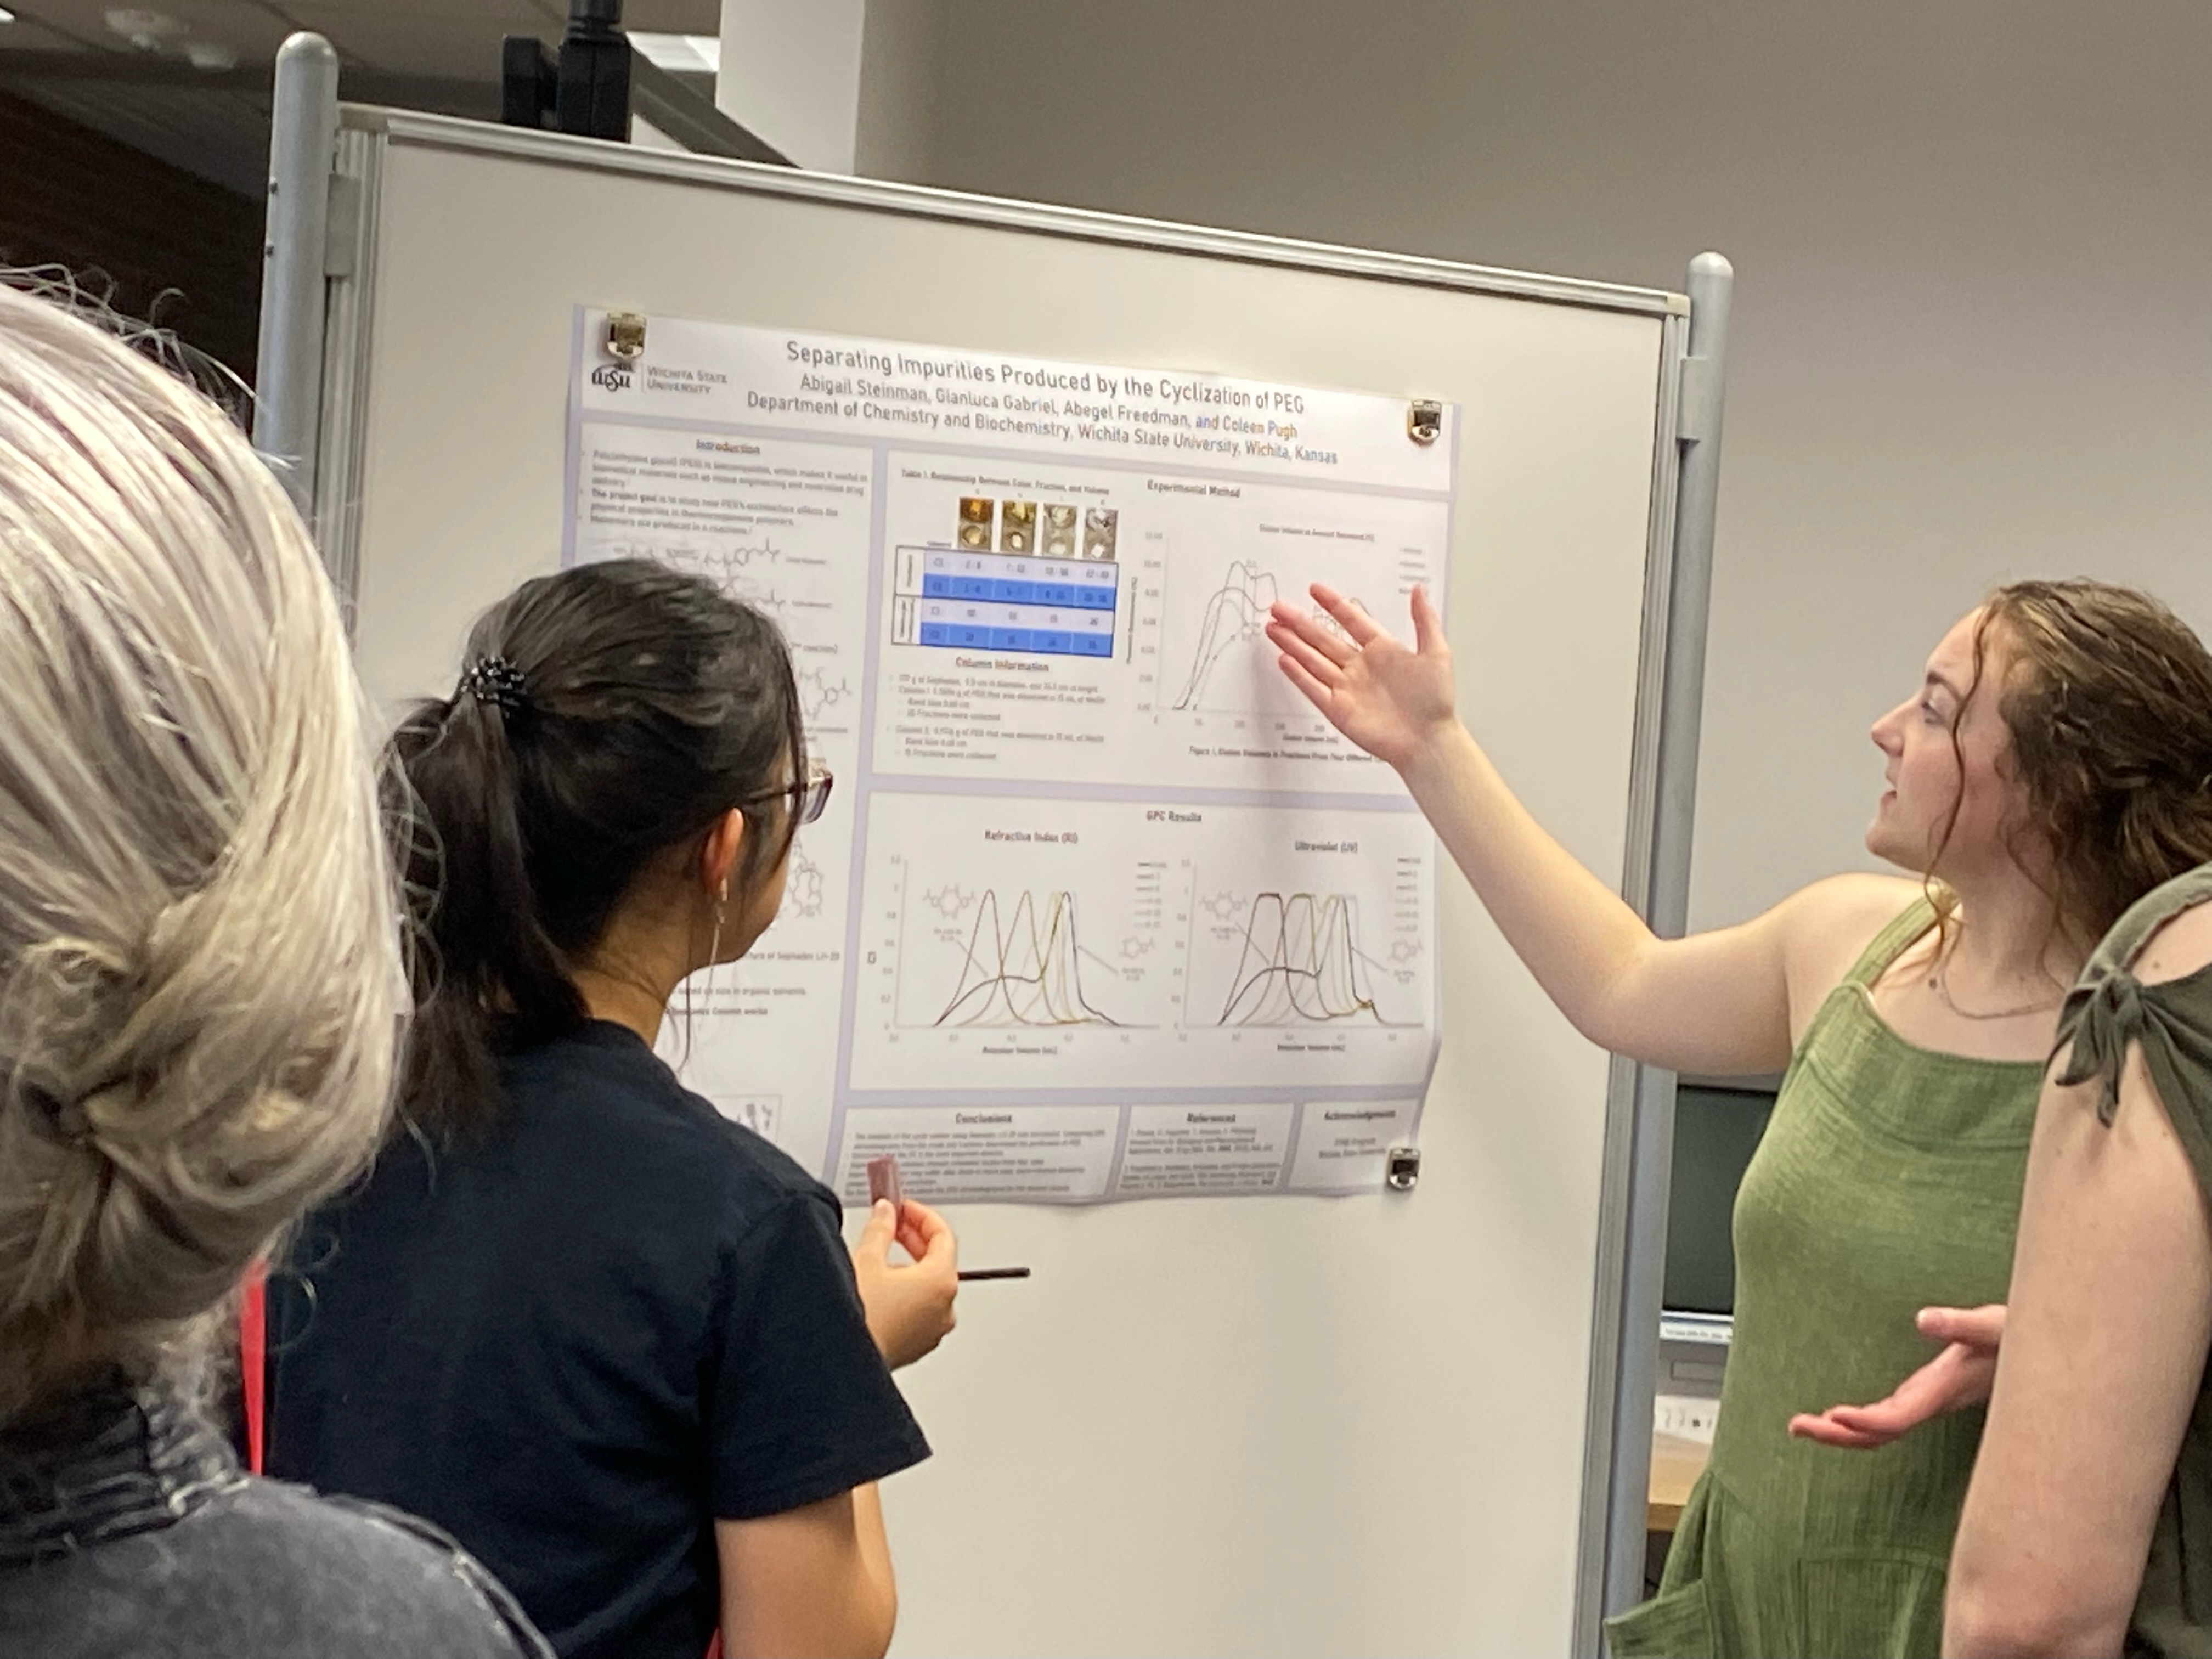 Undergraduate student presenting a poster at a conference